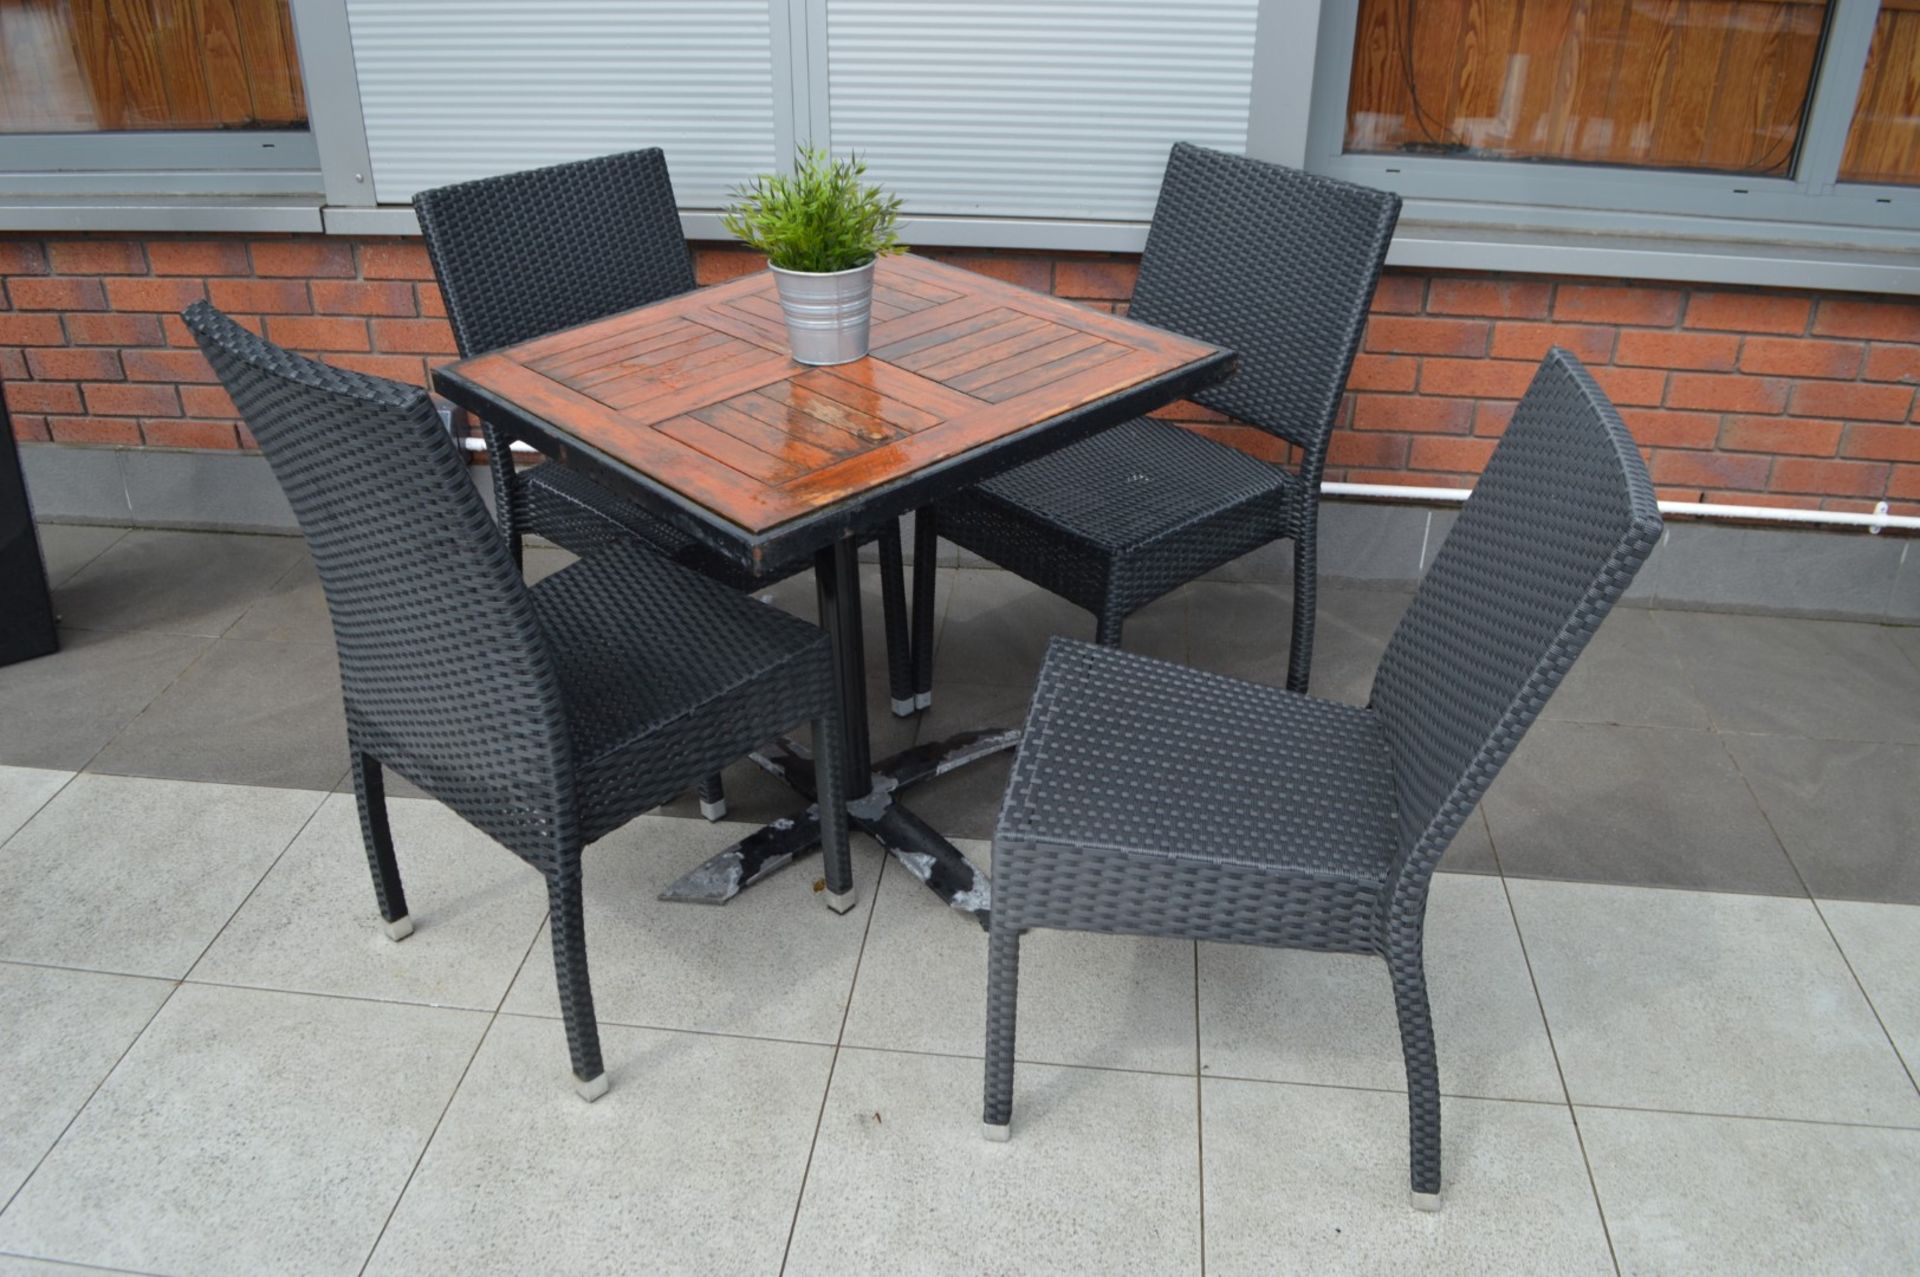 1 x Outdoor Garden Table With Four Charcoal Rattan Chairs - H72 x W74 x D74 cms - CL357 - - Bild 3 aus 3